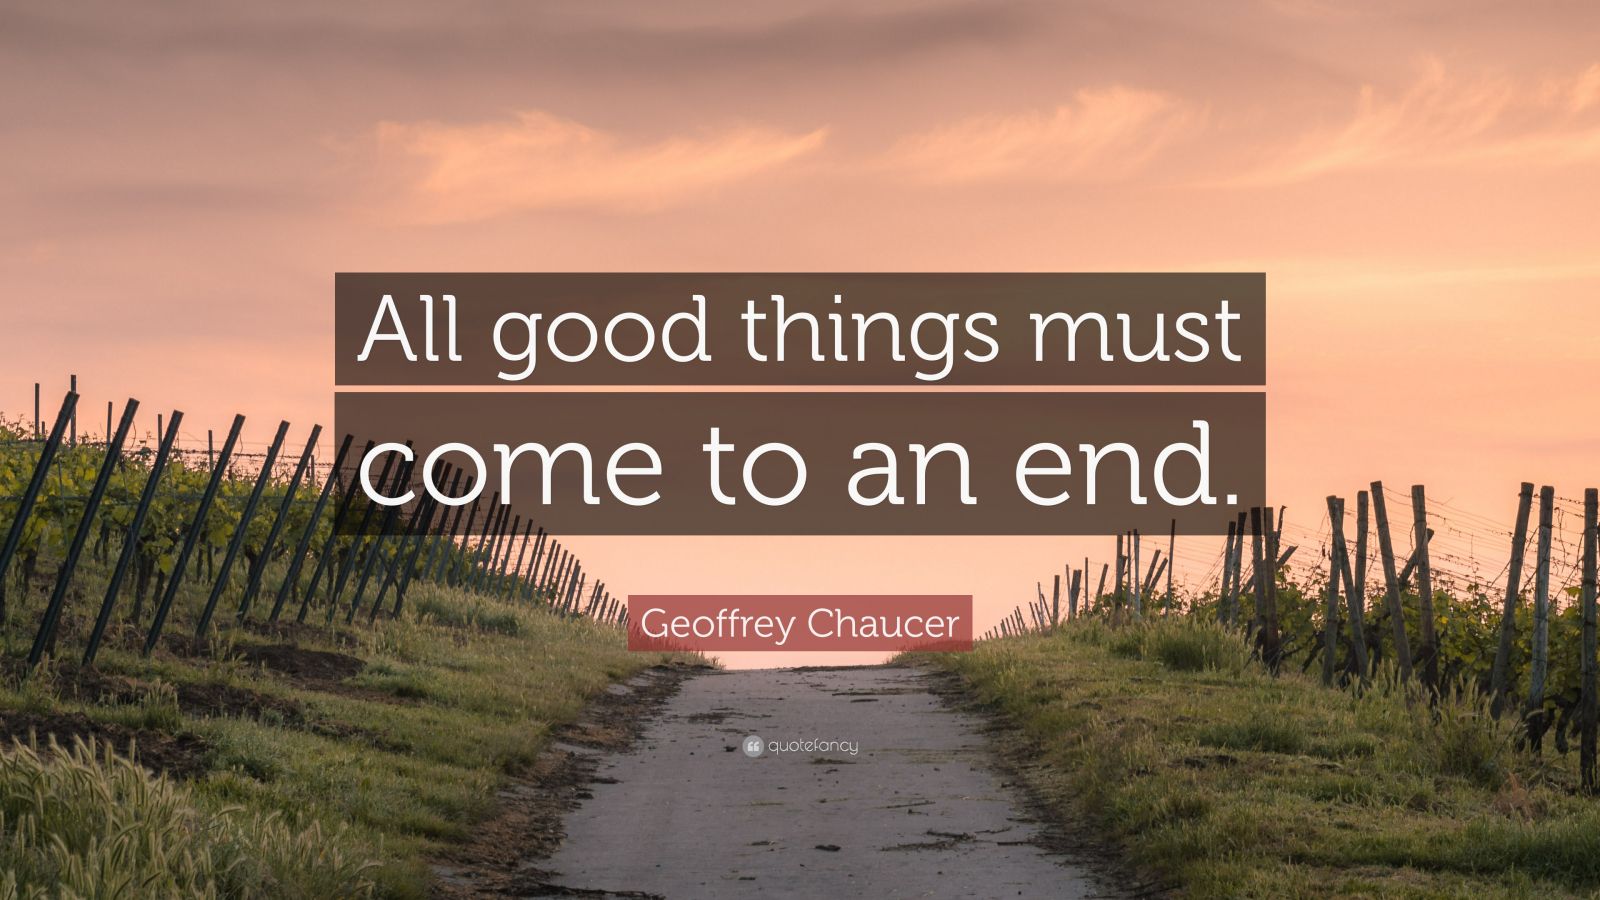 Geoffrey Chaucer Quote “All good things must come to an end.” (12